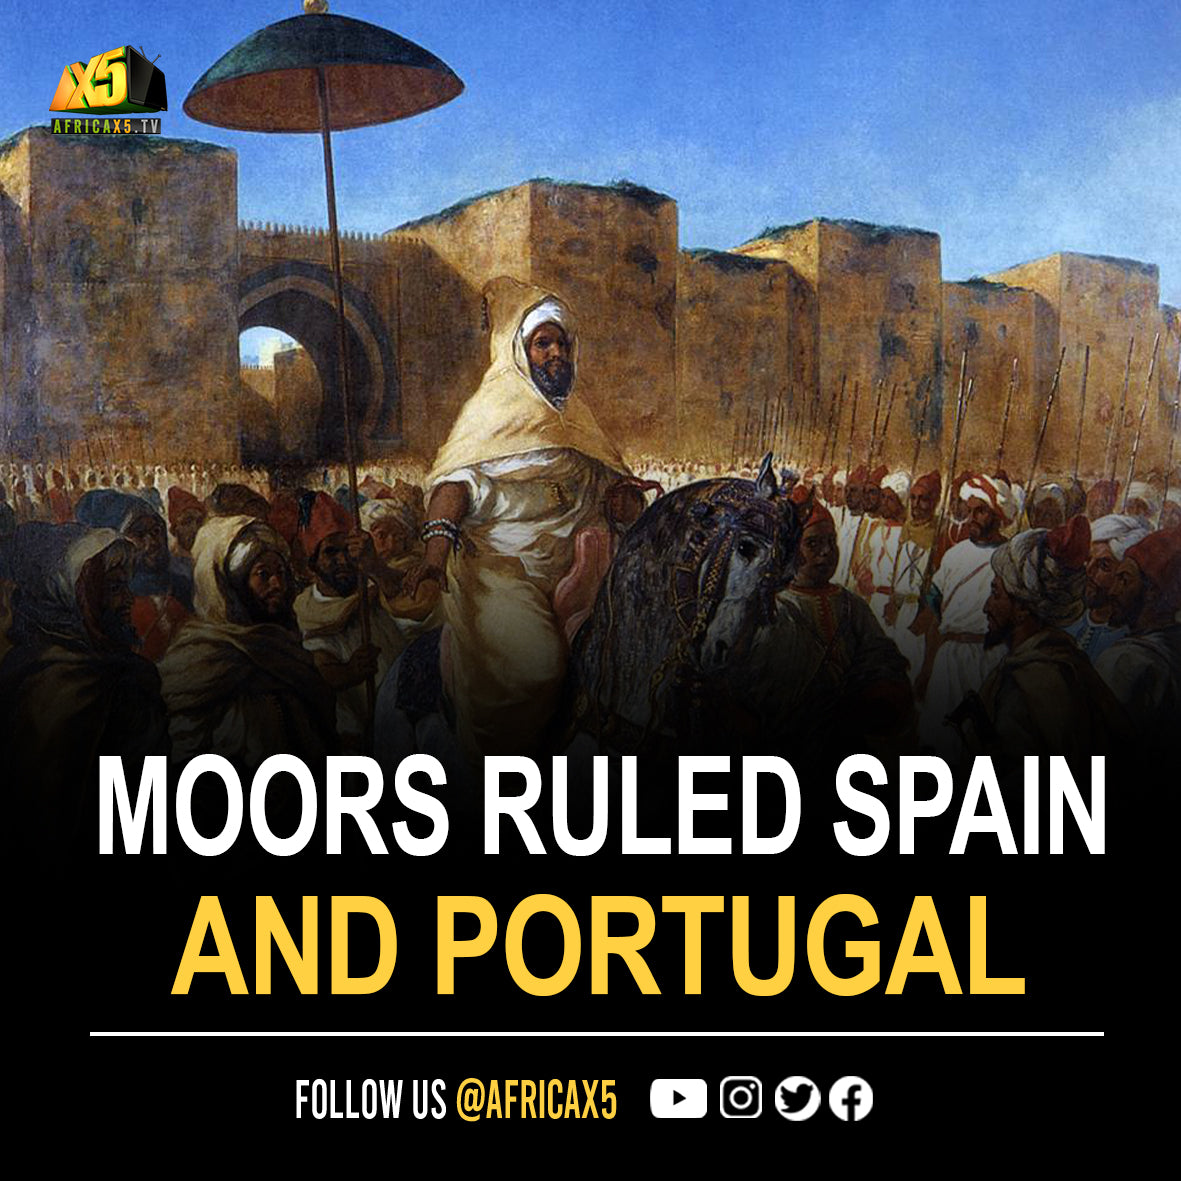 The Moors Ruled Spain and Portugal 754 Years Before The Collapse of The Mali Empire